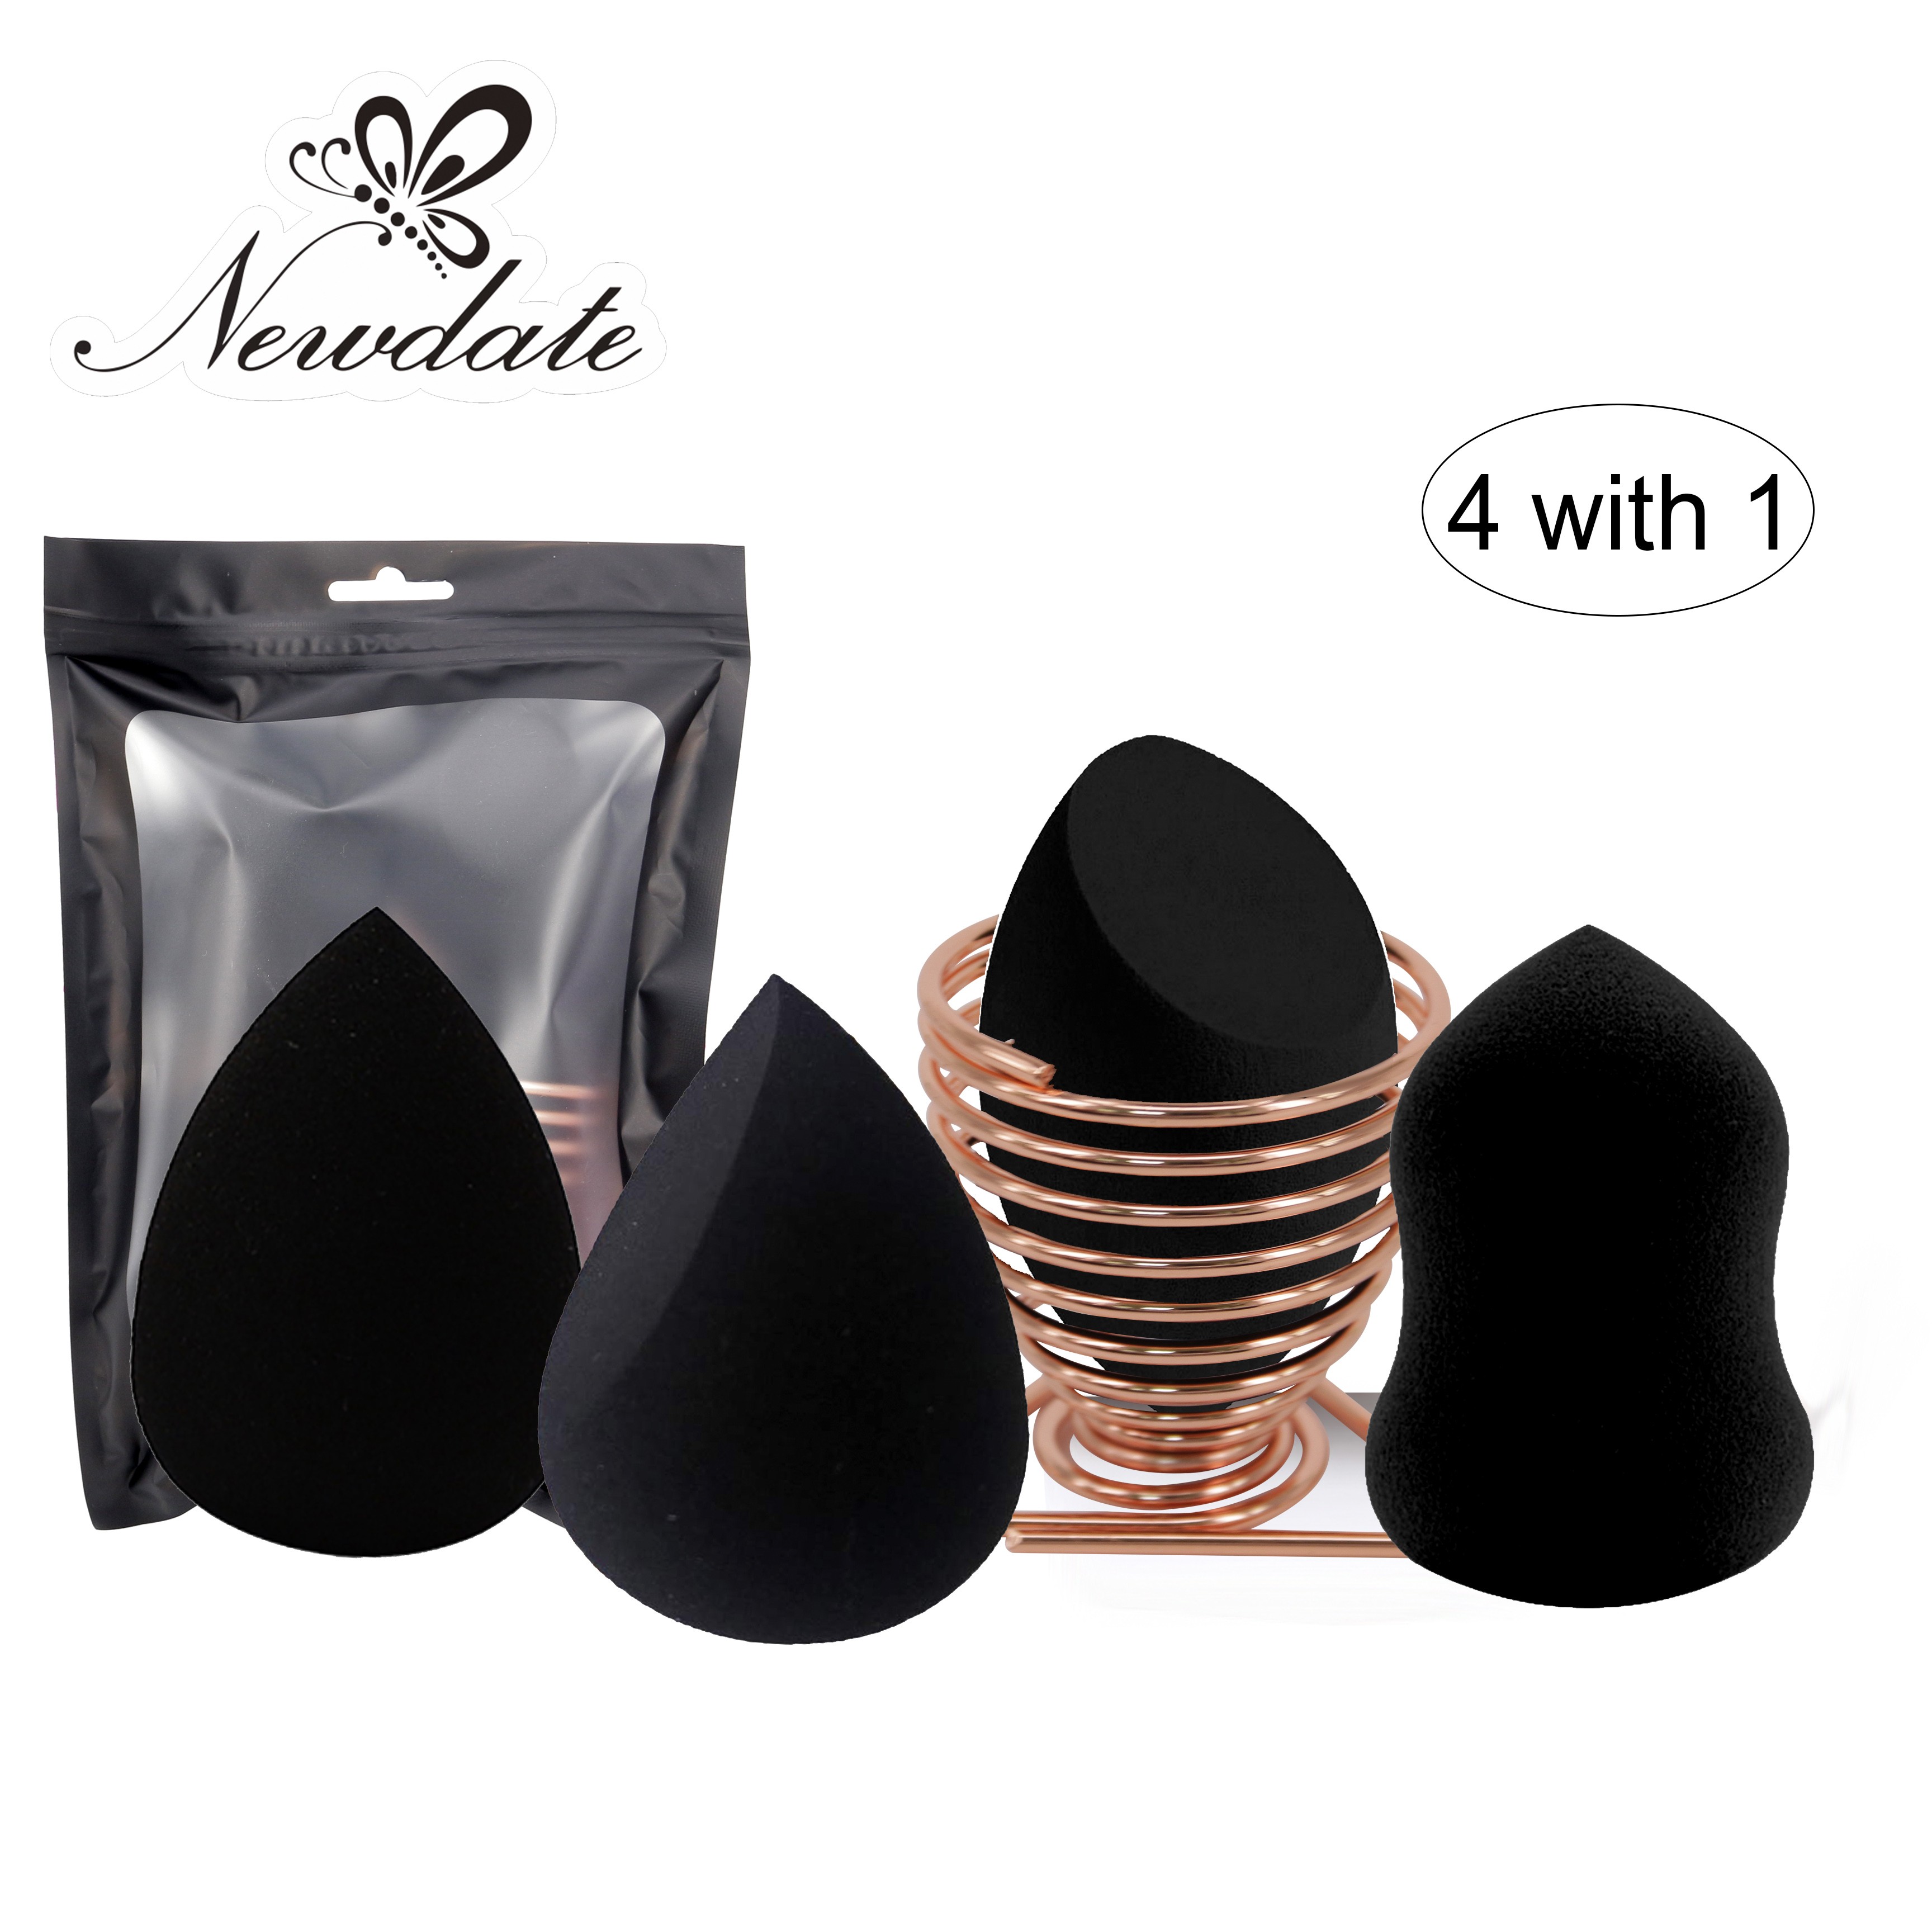 Amazon Hot Selling 4 With 1Accept Customized logo Metal Rose Gold Sponge Holder Black Makeup Cosmetic Tools Puffs Sponge Set